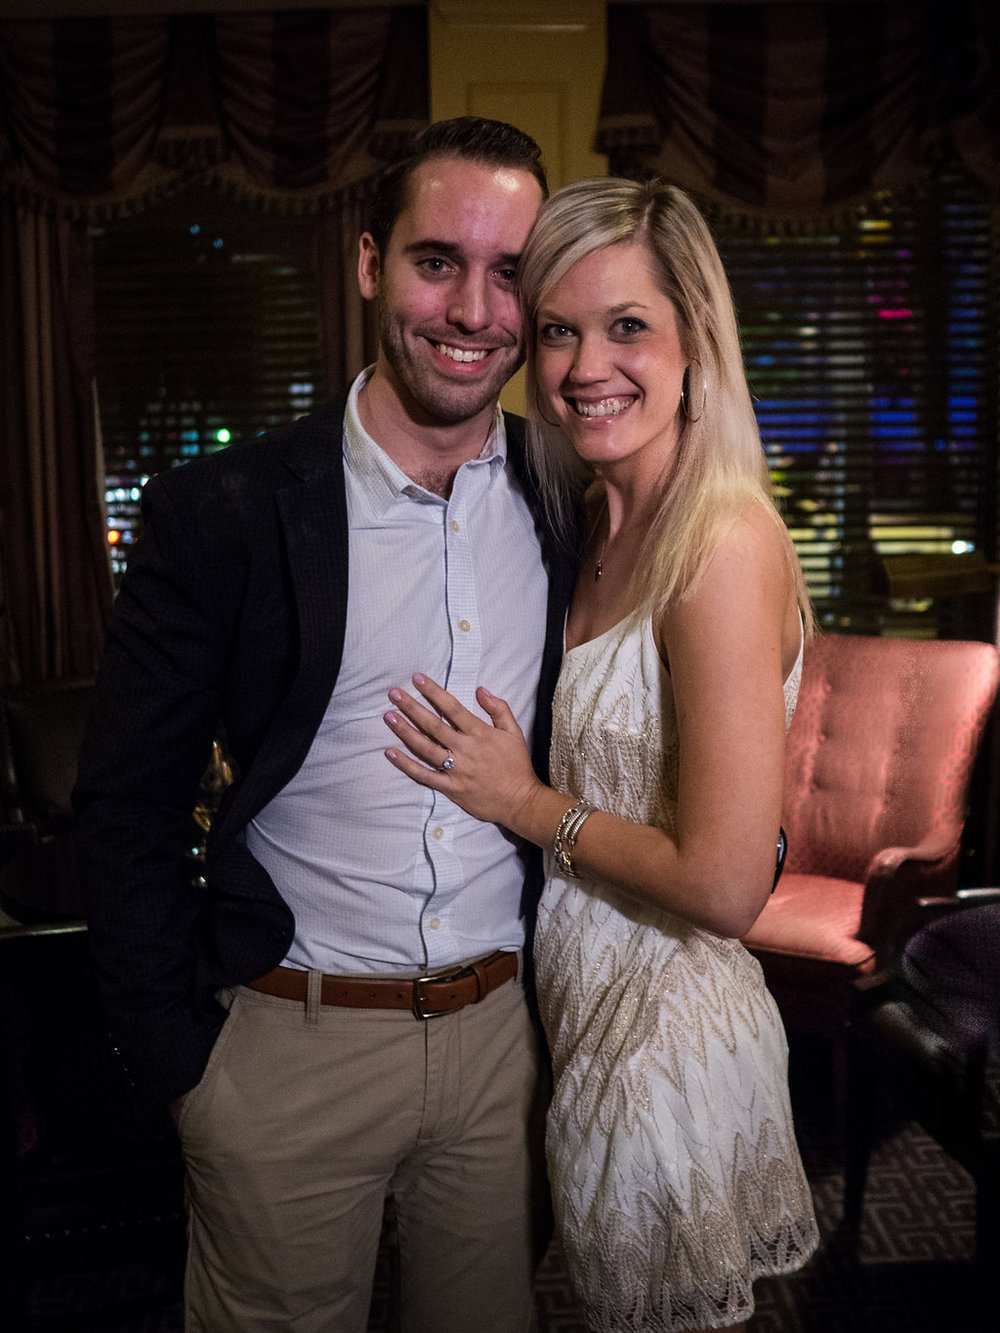 Dunhill Hotel Uptown Charlotte NC Wedding Engagement Photographer Surprise Proposal Photography She Said Yes Couple